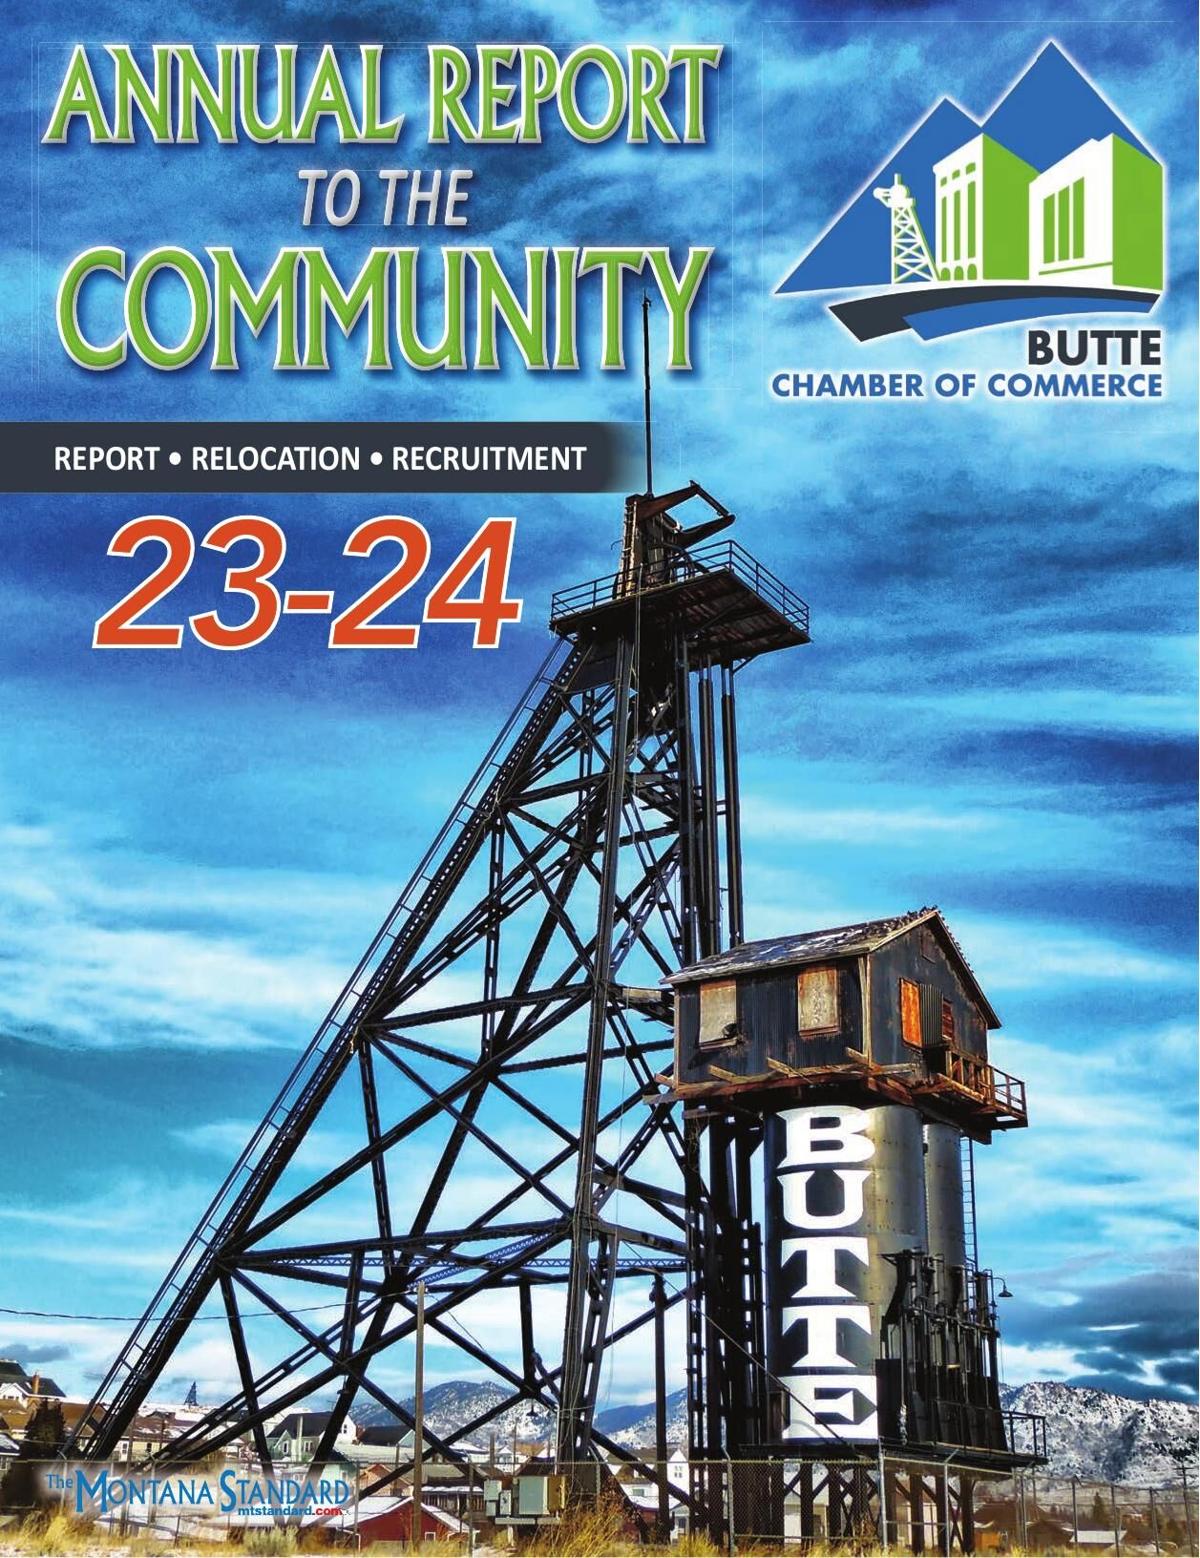 Butte Chamber of Commerce Annual Report to the Community 2023